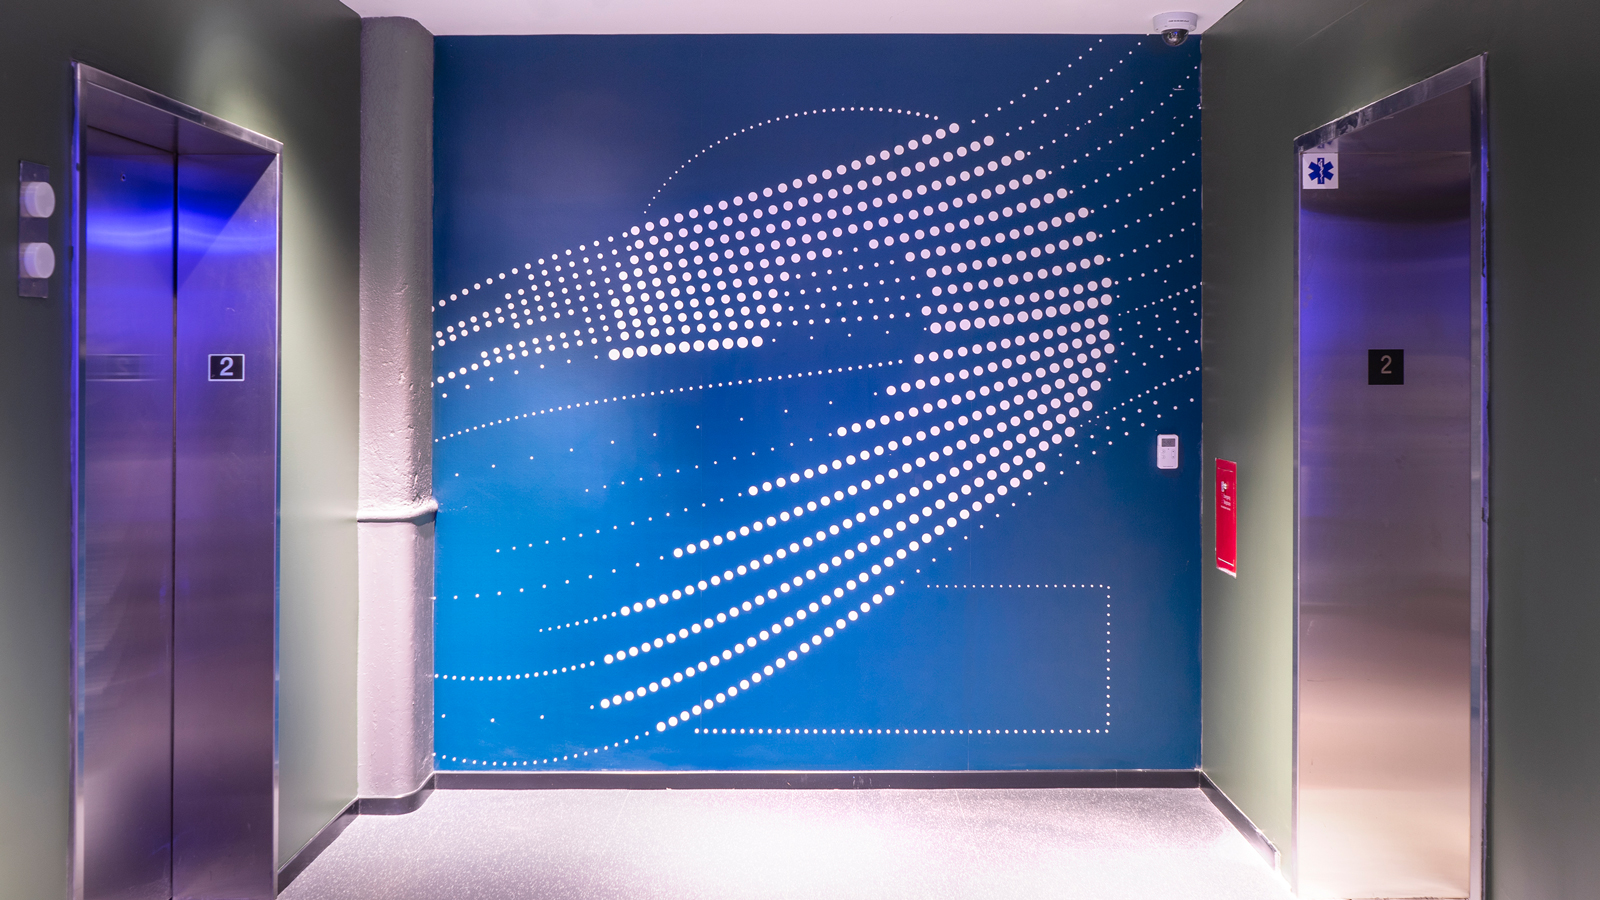 Wall graphic in elevator lobby. Graphic is blue with the number "2" large and made up of large dots